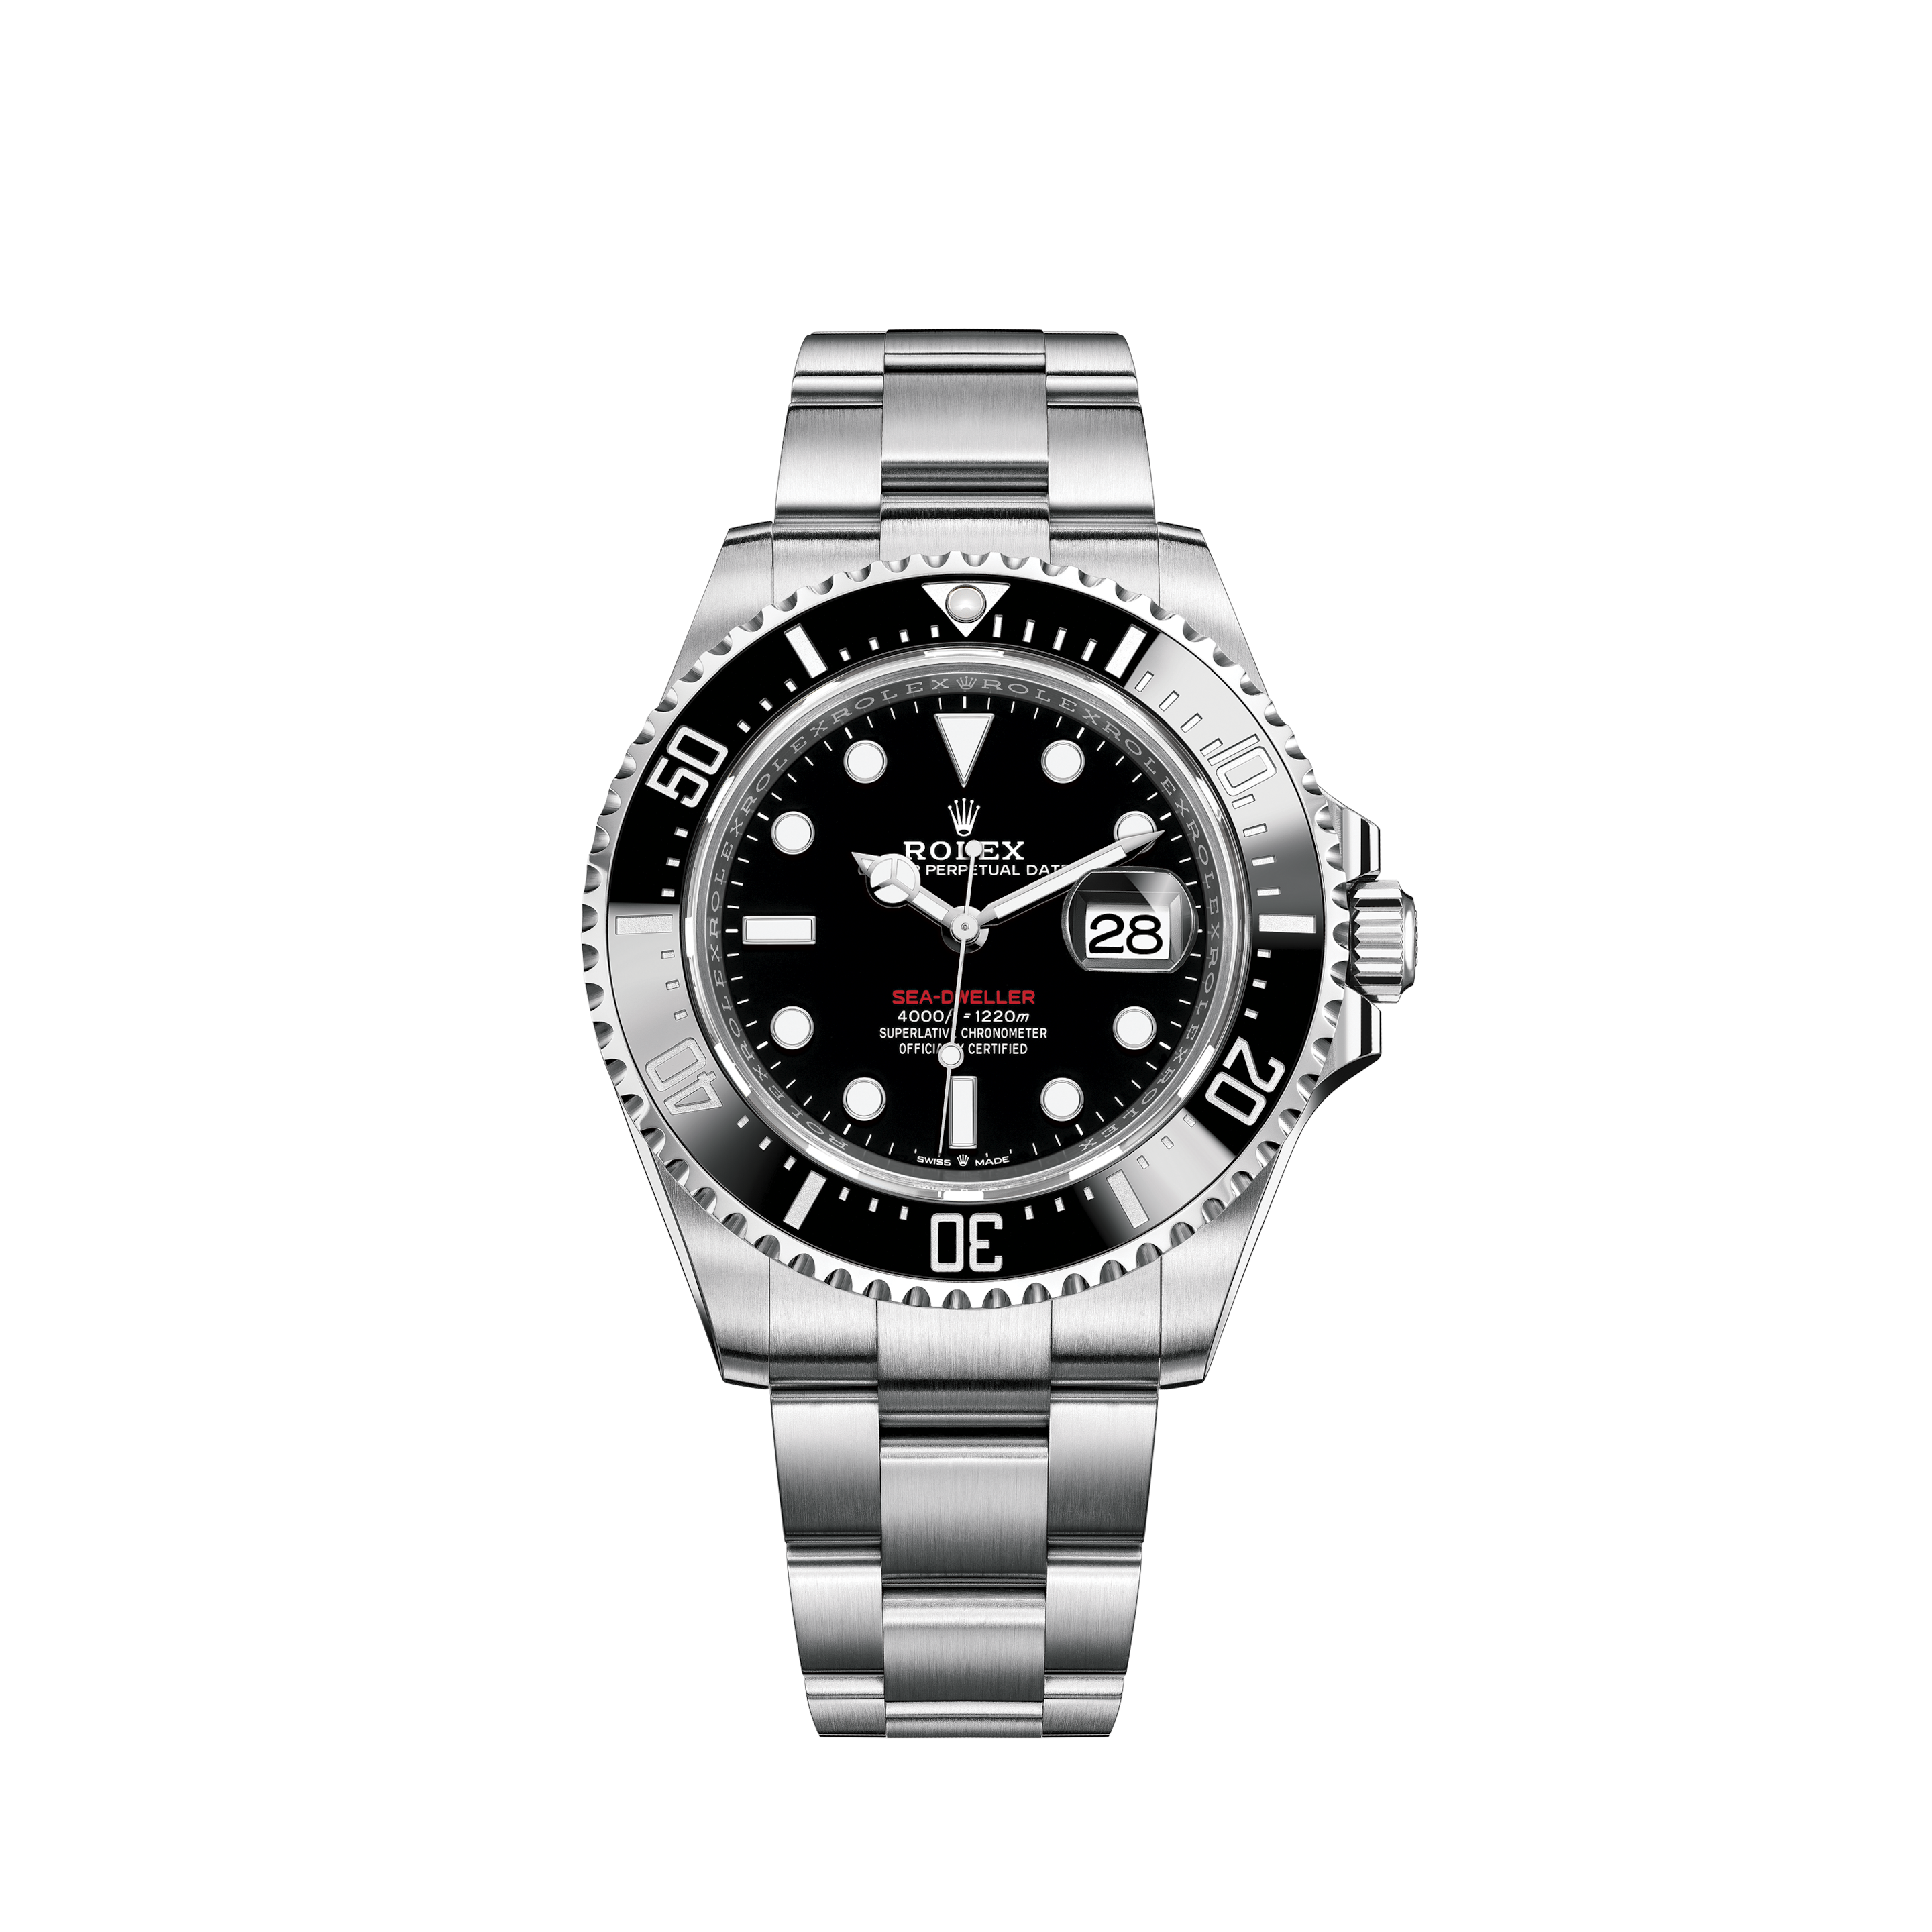 Rolex rare SEA DWELLER 1665 | MK2 | Thin Case | Full Set | punched PapersRolex Oyster Royal Ref. 6426